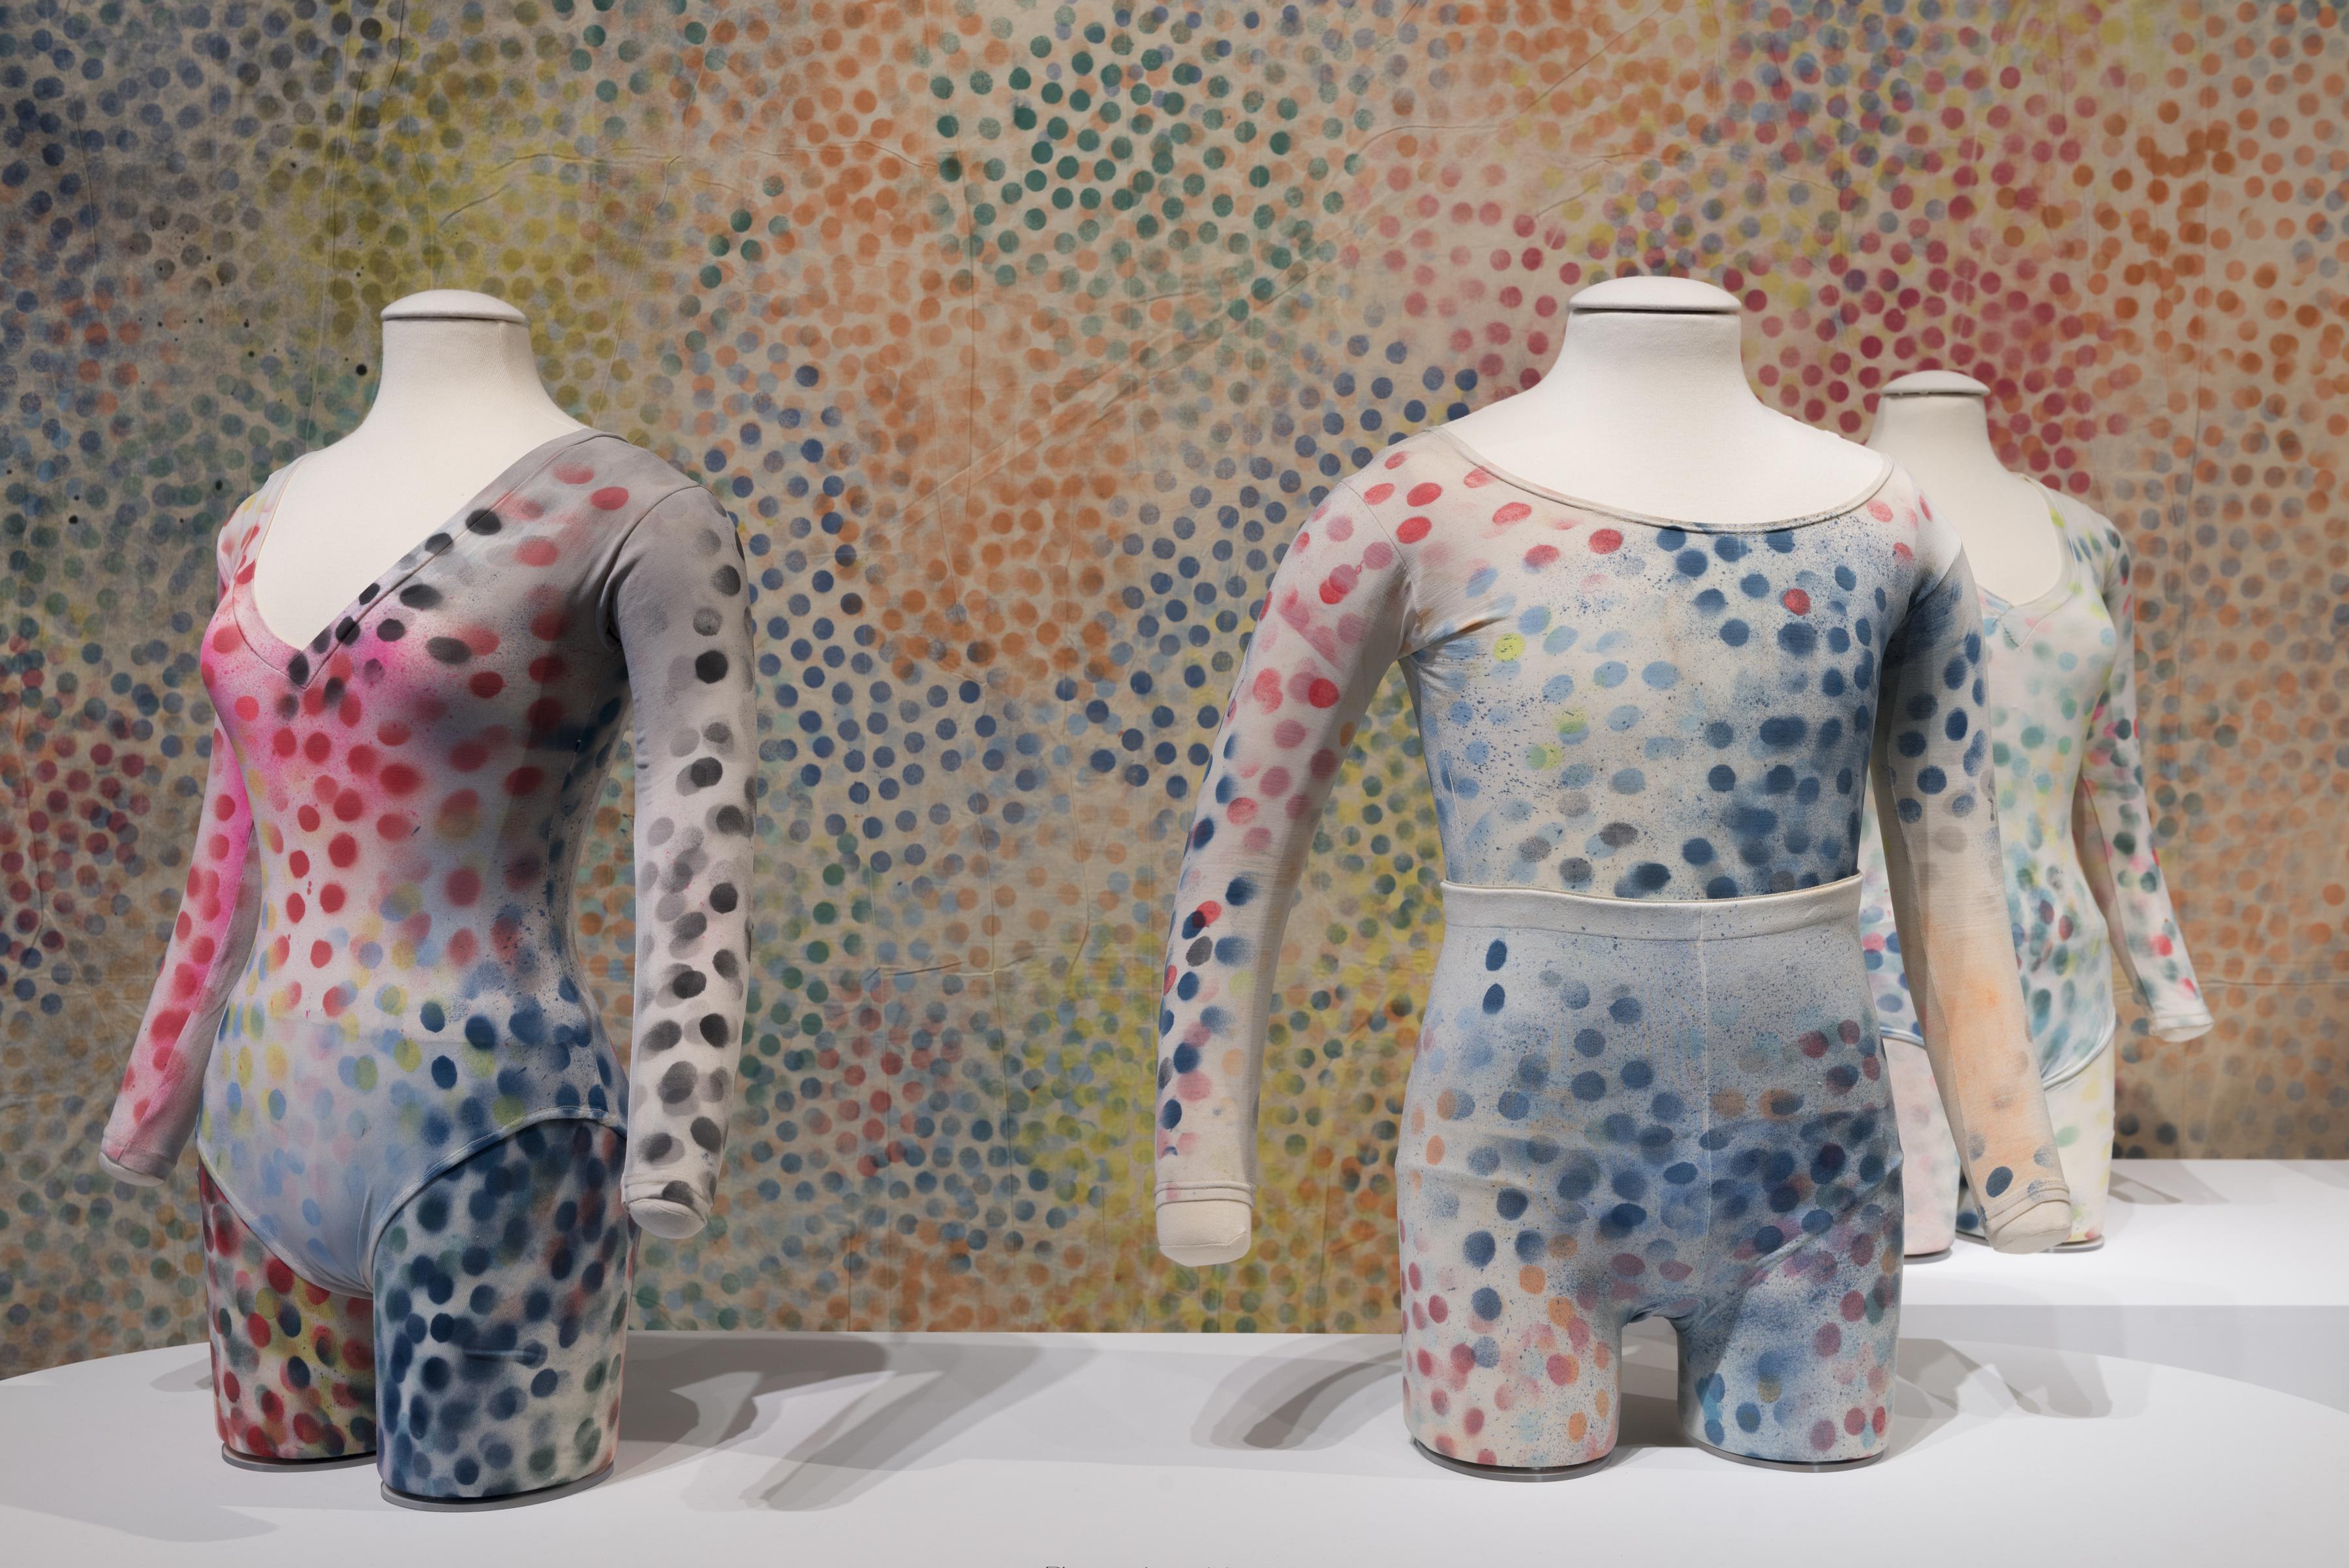 Two headless torso mannequins--one male one female--wear unitards covered in blue, red, and yellow dots, shown in front of a backdrop multicolored dots.